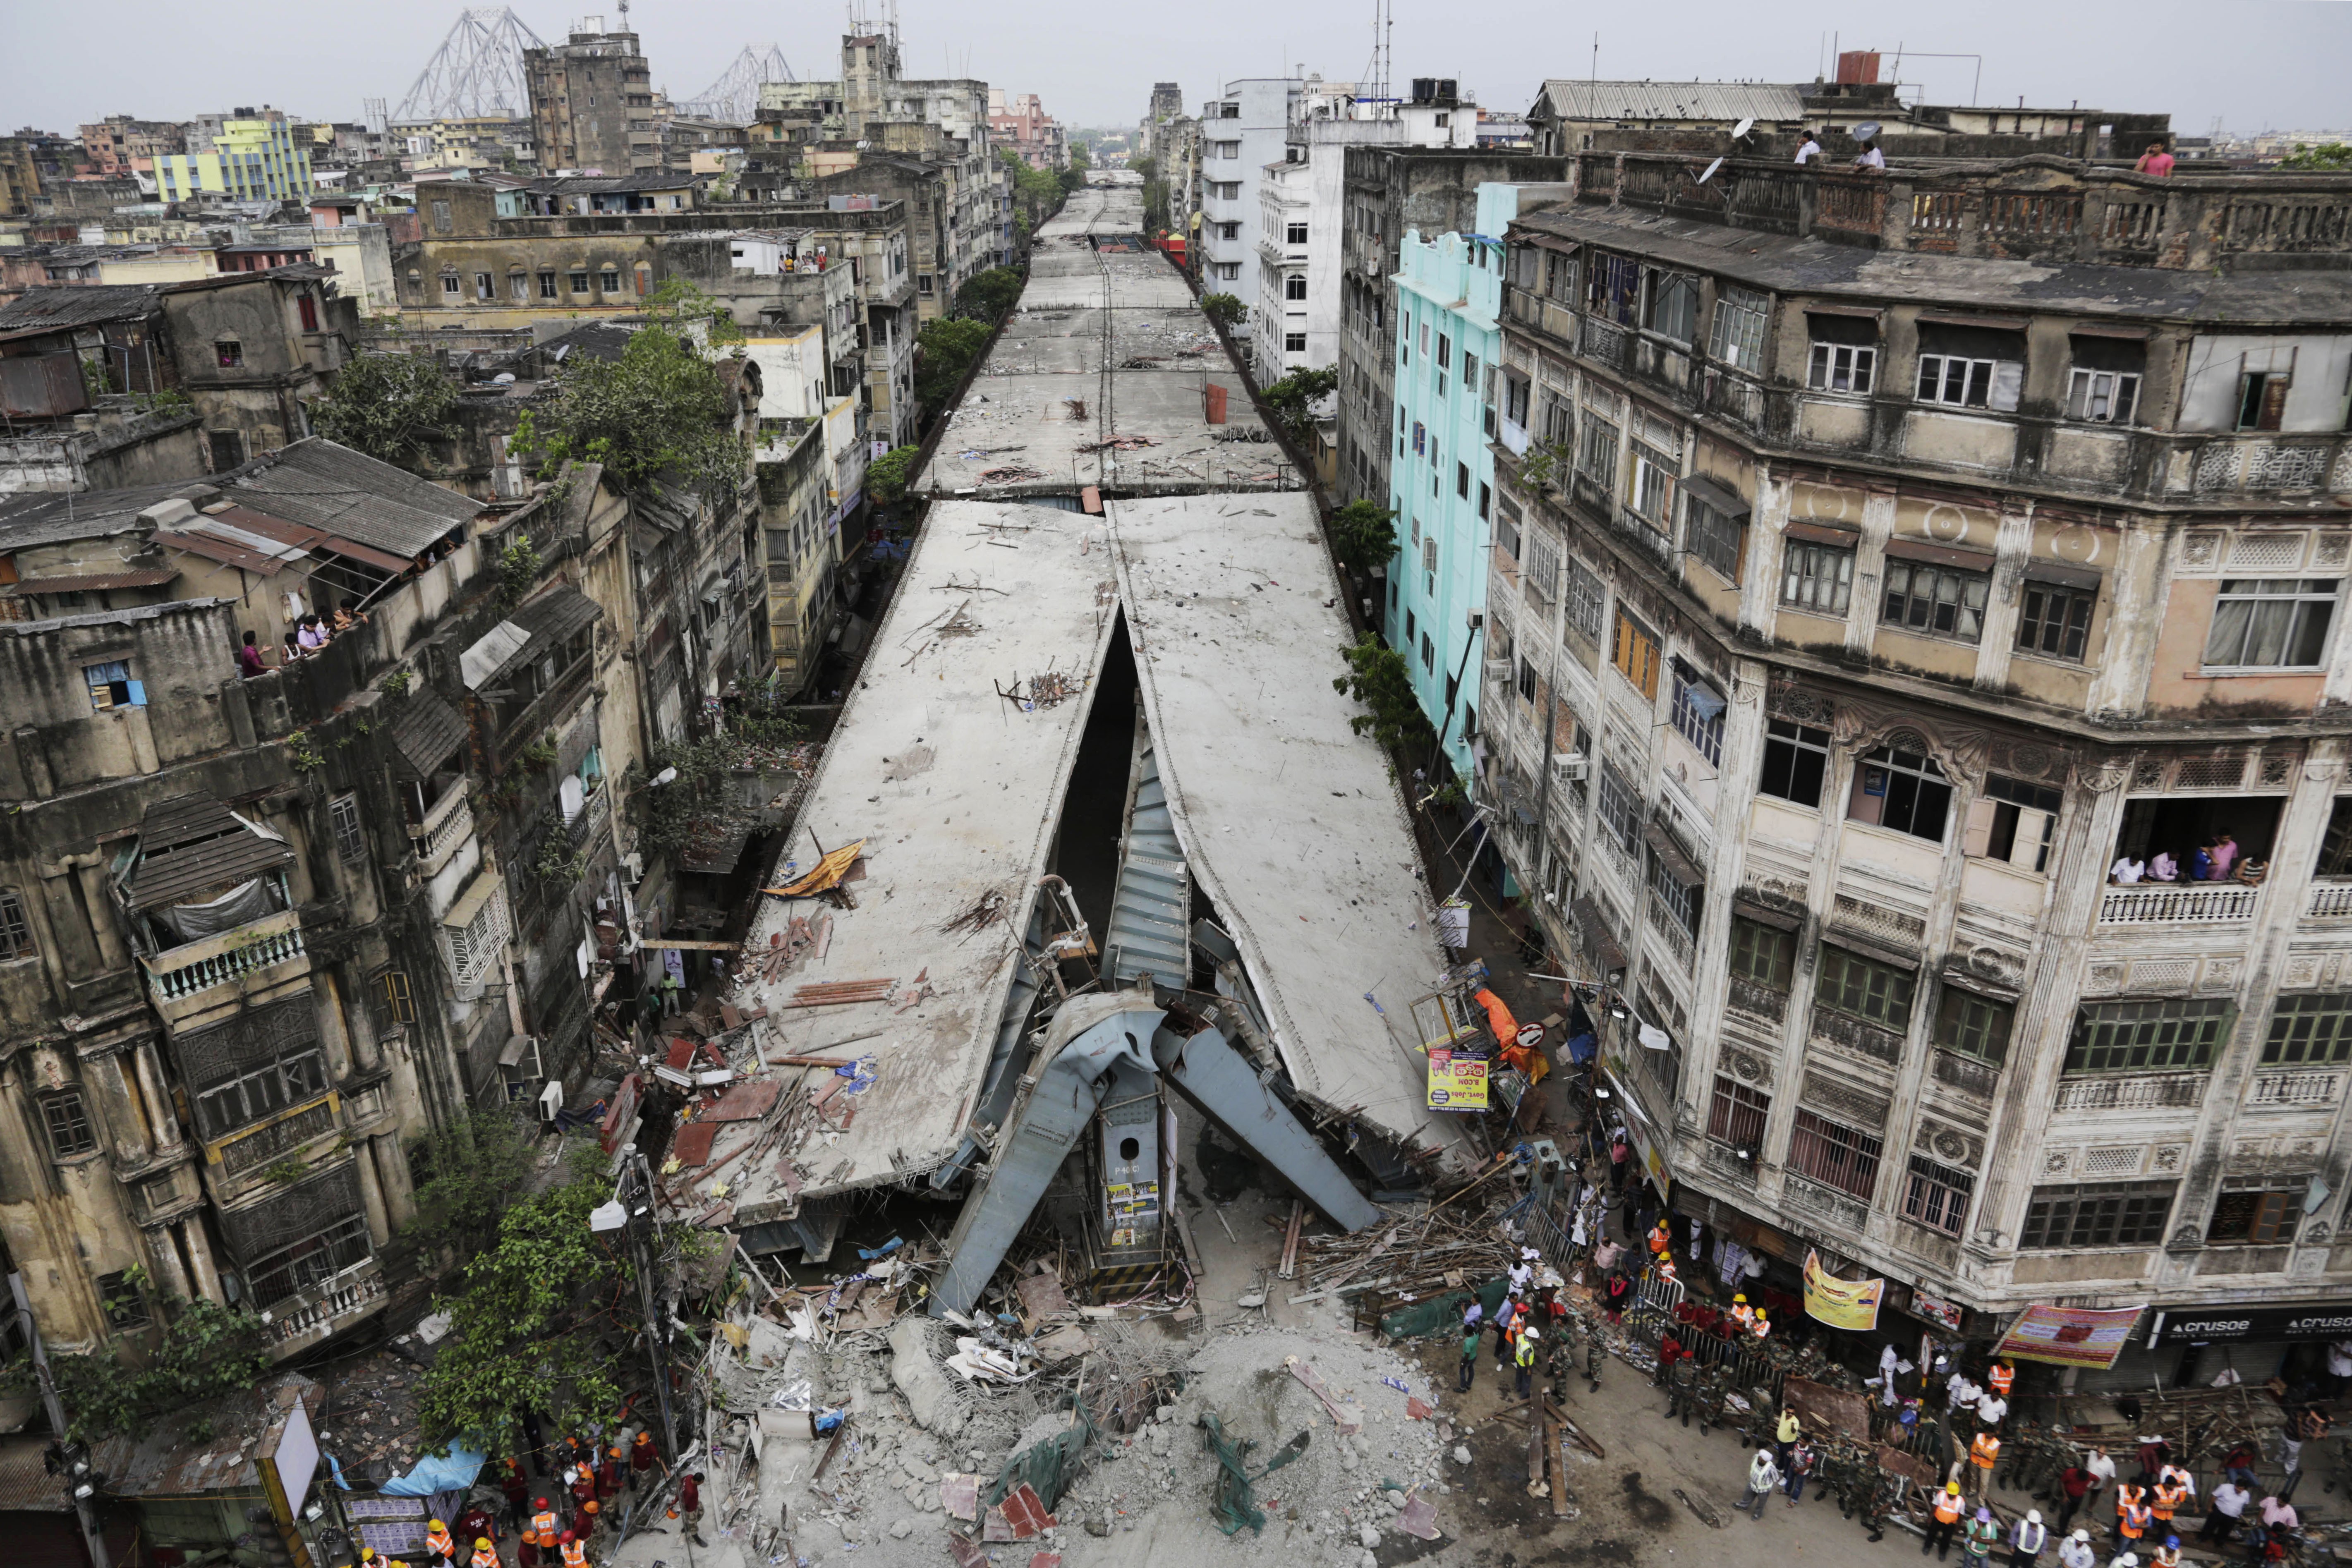 The collapse of the flyover in Kolkata killed more than two dozen people. Photo: AP